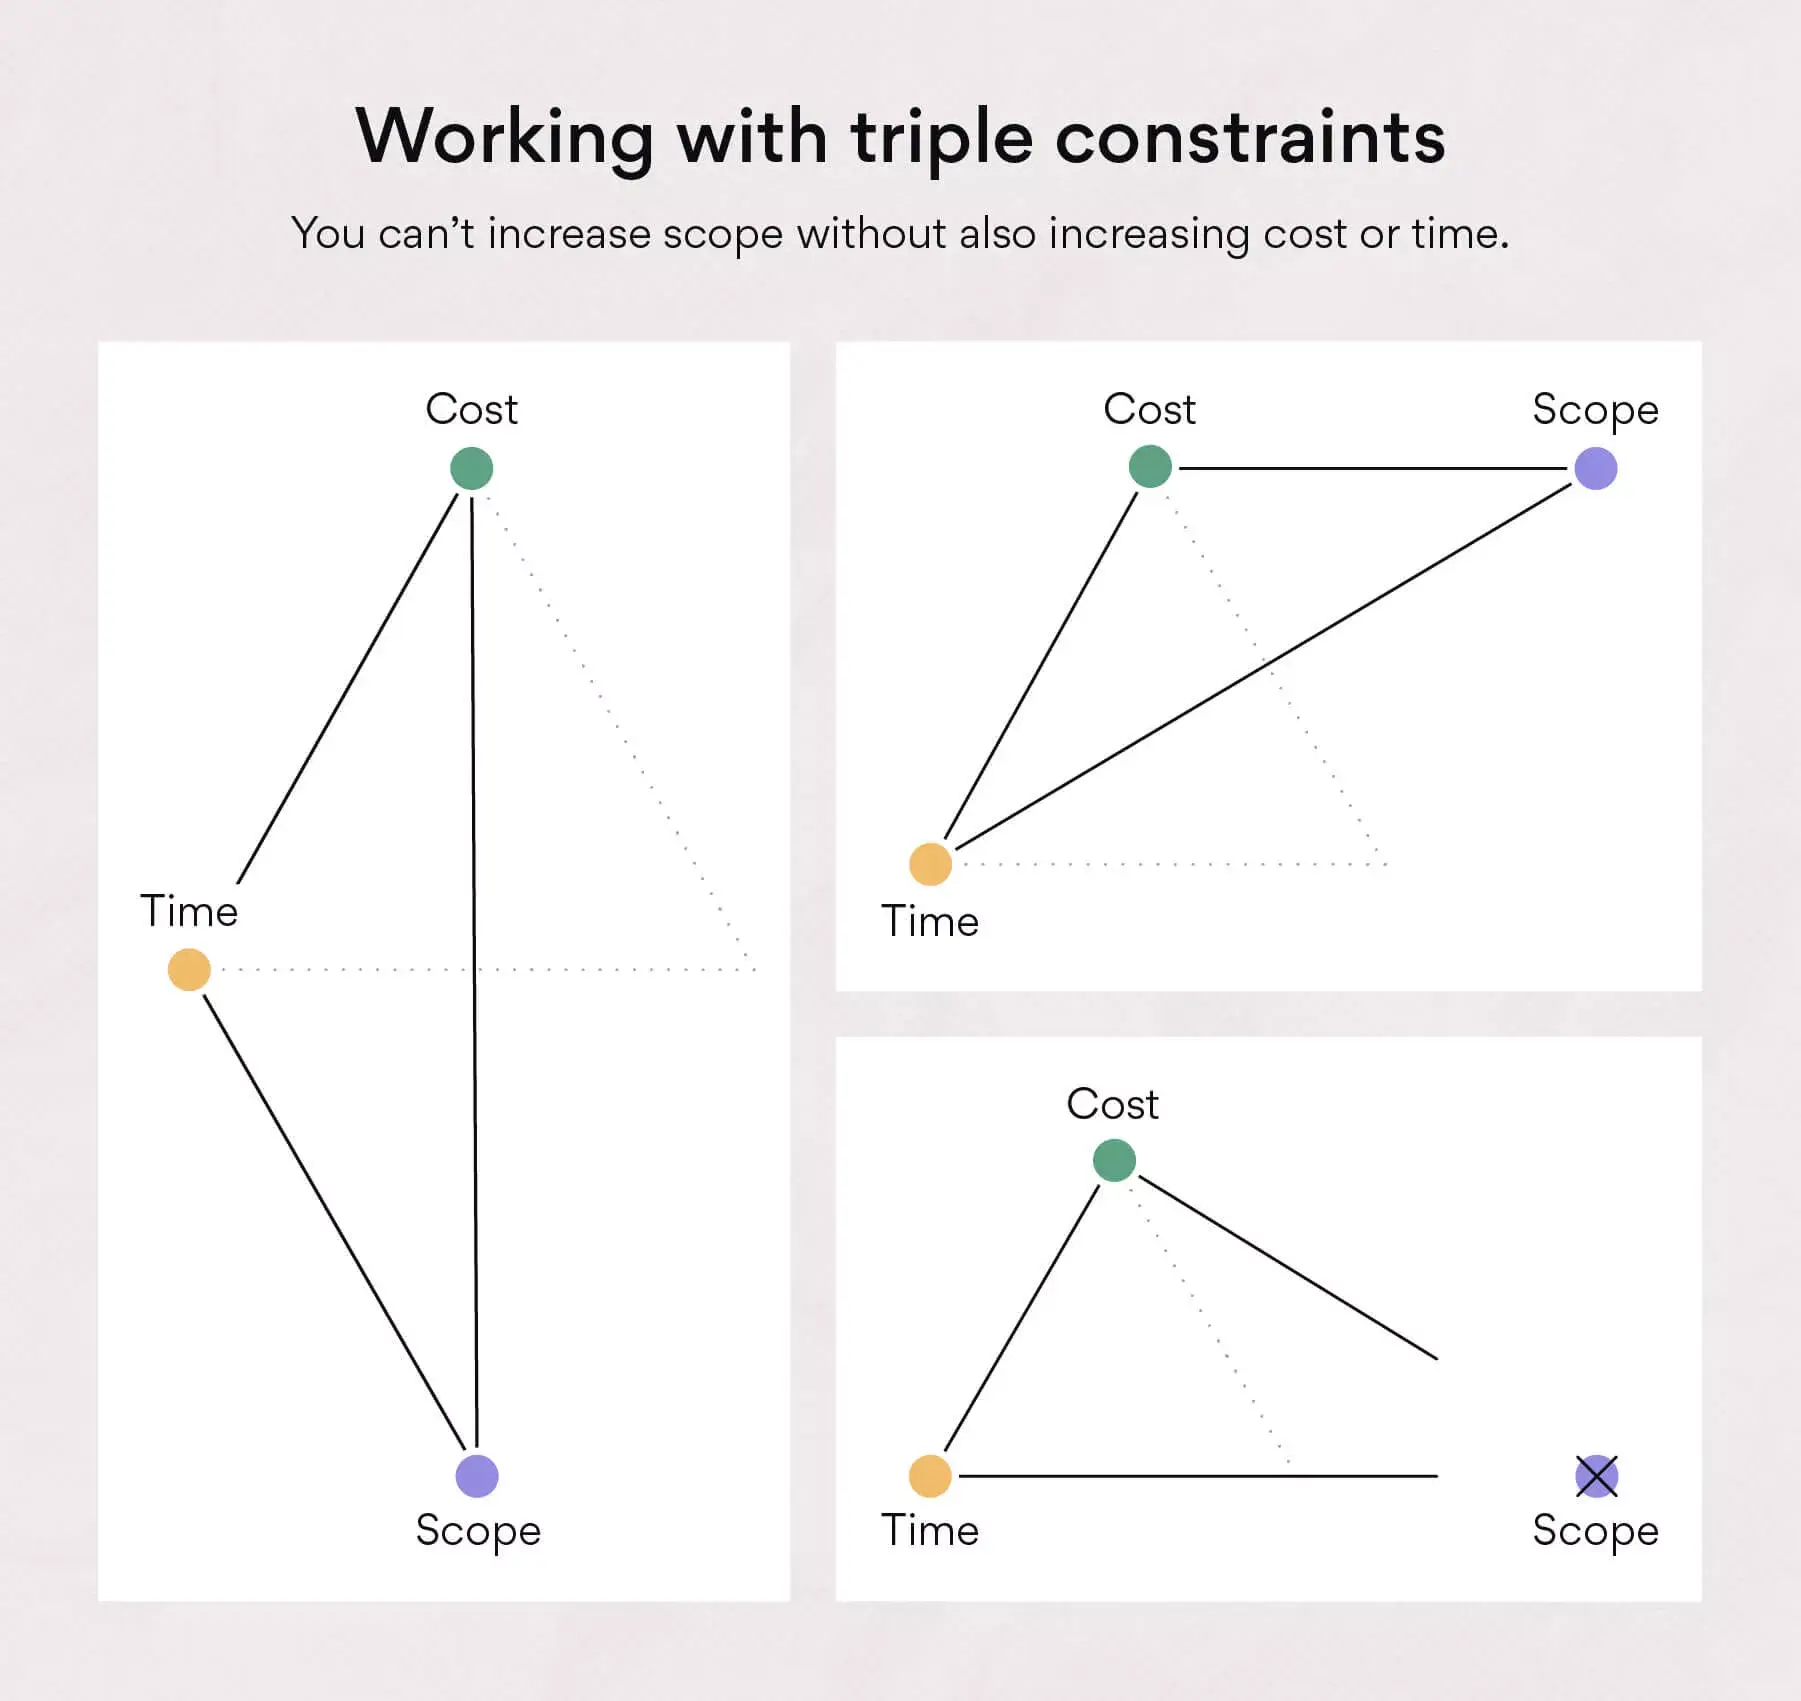 Working with triple constraints